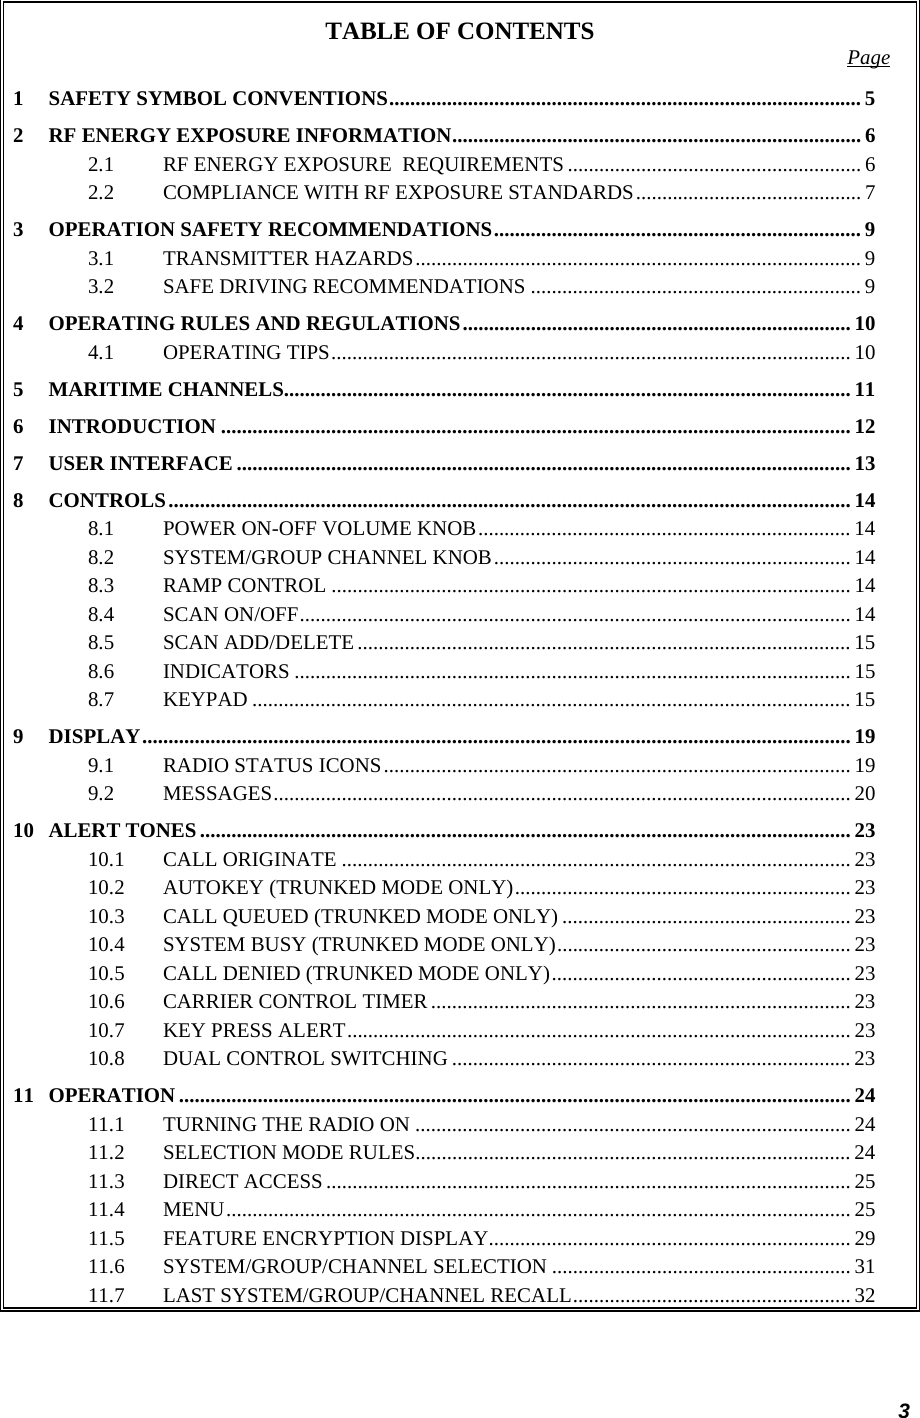 3 TABLE OF CONTENTS  Page 1 SAFETY SYMBOL CONVENTIONS.......................................................................................... 5 2 RF ENERGY EXPOSURE INFORMATION.............................................................................. 6 2.1 RF ENERGY EXPOSURE  REQUIREMENTS ........................................................ 6 2.2 COMPLIANCE WITH RF EXPOSURE STANDARDS........................................... 7 3 OPERATION SAFETY RECOMMENDATIONS...................................................................... 9 3.1 TRANSMITTER HAZARDS..................................................................................... 9 3.2 SAFE DRIVING RECOMMENDATIONS ............................................................... 9 4 OPERATING RULES AND REGULATIONS.......................................................................... 10 4.1 OPERATING TIPS................................................................................................... 10 5 MARITIME CHANNELS............................................................................................................ 11 6 INTRODUCTION ........................................................................................................................ 12 7 USER INTERFACE ..................................................................................................................... 13 8 CONTROLS.................................................................................................................................. 14 8.1 POWER ON-OFF VOLUME KNOB....................................................................... 14 8.2 SYSTEM/GROUP CHANNEL KNOB.................................................................... 14 8.3 RAMP CONTROL ................................................................................................... 14 8.4 SCAN ON/OFF......................................................................................................... 14 8.5 SCAN ADD/DELETE.............................................................................................. 15 8.6 INDICATORS .......................................................................................................... 15 8.7 KEYPAD .................................................................................................................. 15 9 DISPLAY....................................................................................................................................... 19 9.1 RADIO STATUS ICONS......................................................................................... 19 9.2 MESSAGES.............................................................................................................. 20 10 ALERT TONES............................................................................................................................ 23 10.1 CALL ORIGINATE .................................................................................................23 10.2 AUTOKEY (TRUNKED MODE ONLY)................................................................ 23 10.3 CALL QUEUED (TRUNKED MODE ONLY) ....................................................... 23 10.4 SYSTEM BUSY (TRUNKED MODE ONLY)........................................................ 23 10.5 CALL DENIED (TRUNKED MODE ONLY)......................................................... 23 10.6 CARRIER CONTROL TIMER ................................................................................ 23 10.7 KEY PRESS ALERT................................................................................................ 23 10.8 DUAL CONTROL SWITCHING ............................................................................ 23 11 OPERATION ................................................................................................................................ 24 11.1 TURNING THE RADIO ON ................................................................................... 24 11.2 SELECTION MODE RULES................................................................................... 24 11.3 DIRECT ACCESS.................................................................................................... 25 11.4 MENU....................................................................................................................... 25 11.5 FEATURE ENCRYPTION DISPLAY..................................................................... 29 11.6 SYSTEM/GROUP/CHANNEL SELECTION ......................................................... 31 11.7 LAST SYSTEM/GROUP/CHANNEL RECALL..................................................... 32 